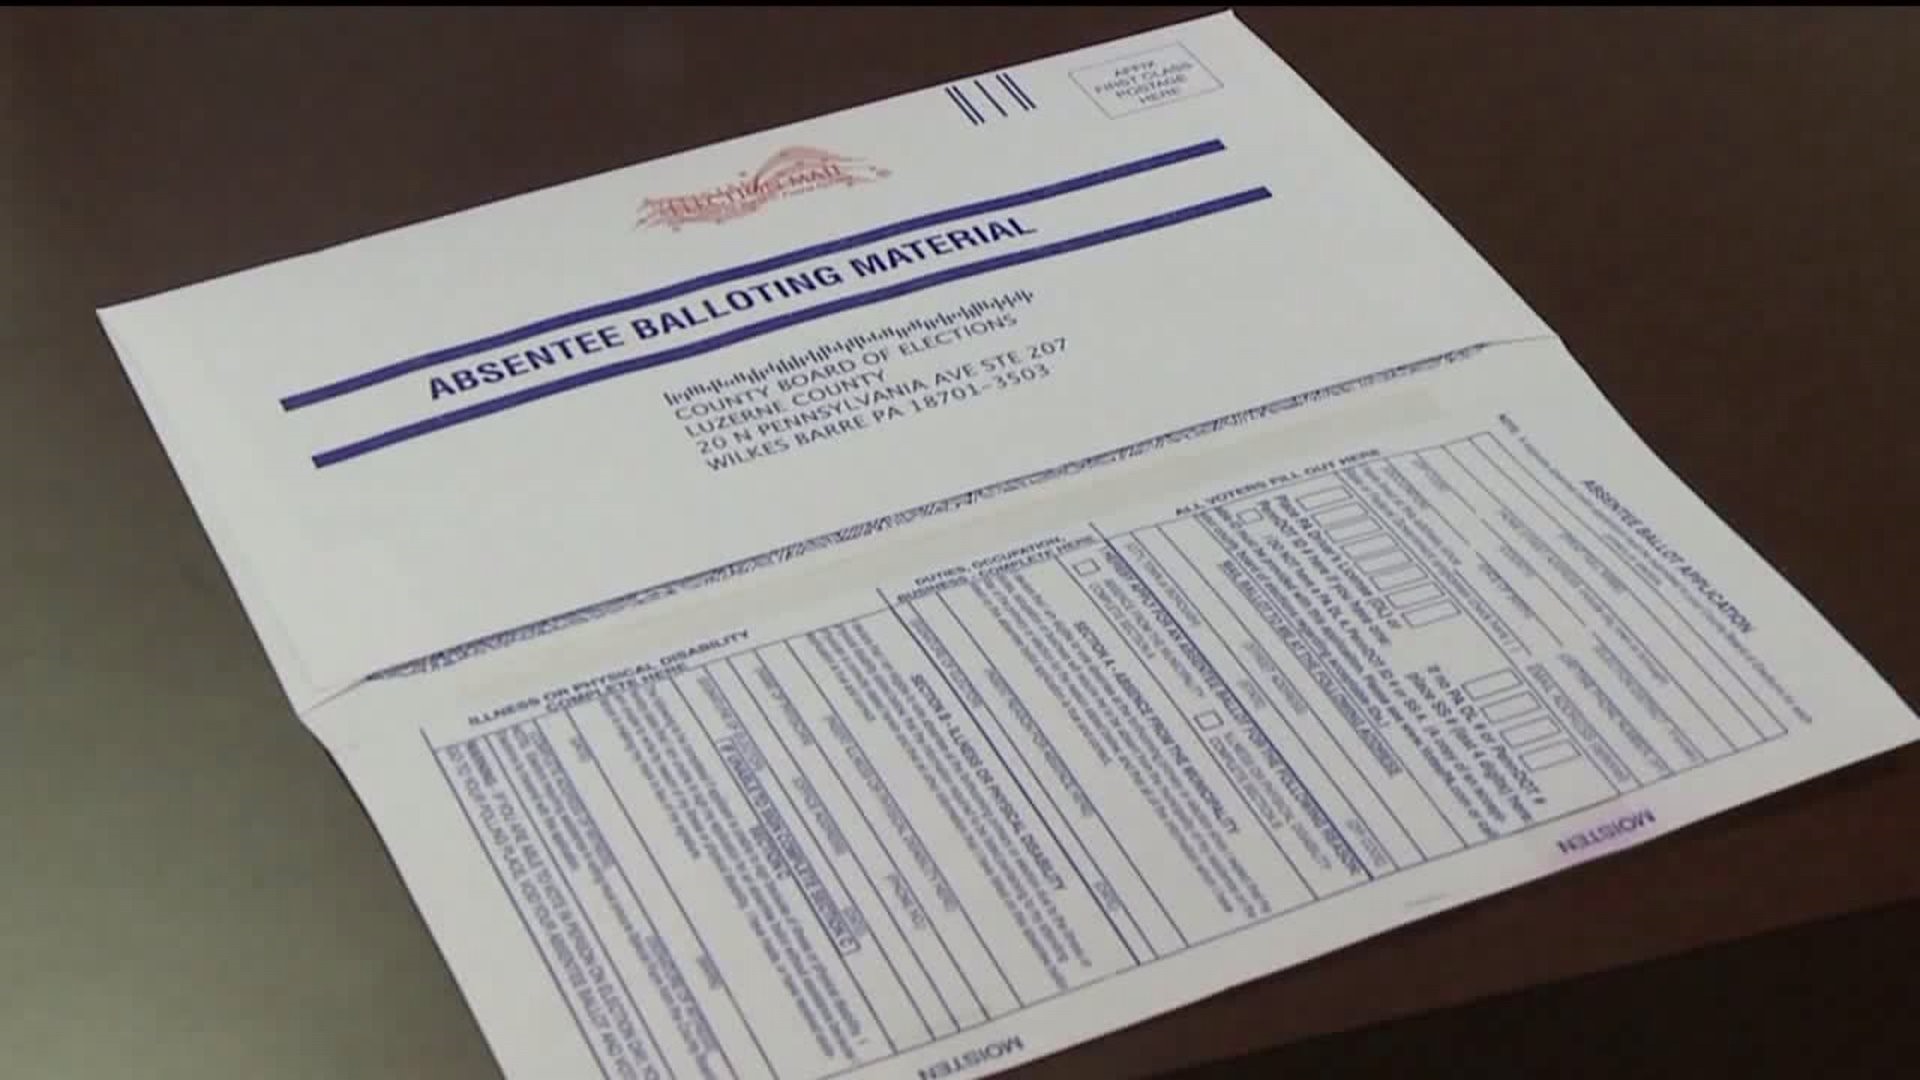 Absent voter ballots are now available for the presidential primary election in a few weeks.